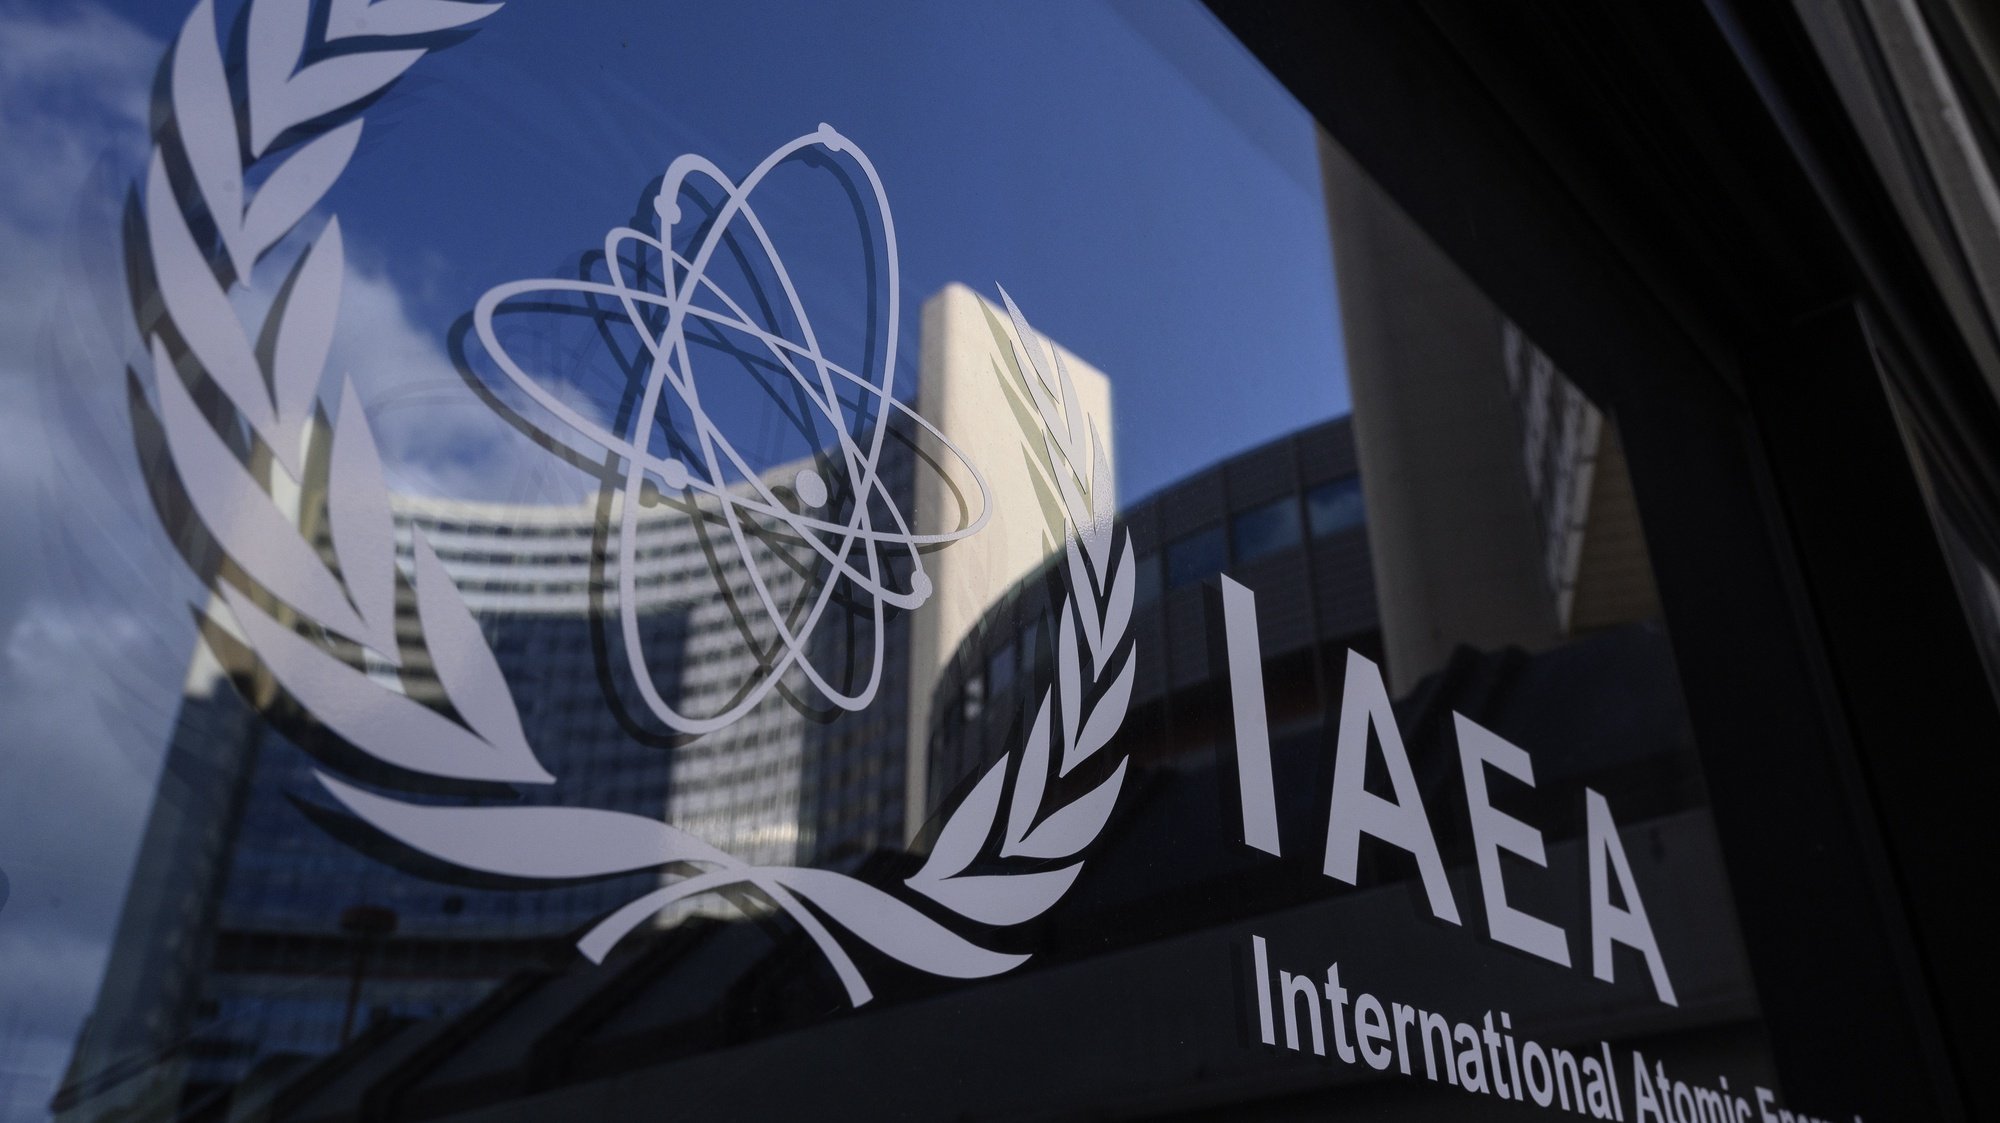 epa09224033 A logo of the International Atomic Energy Agency (IAEA) is seen in front of the IAEA headquarters of the UN seat in Vienna, Austria, 23 May 2021. A press conference of IAEA Director General Rafael Mariano Grossi is expected on 24 May 2021, after consultations with Iran regarding the technical understanding between the IAEA and Iran.  EPA/CHRISTIAN BRUNA